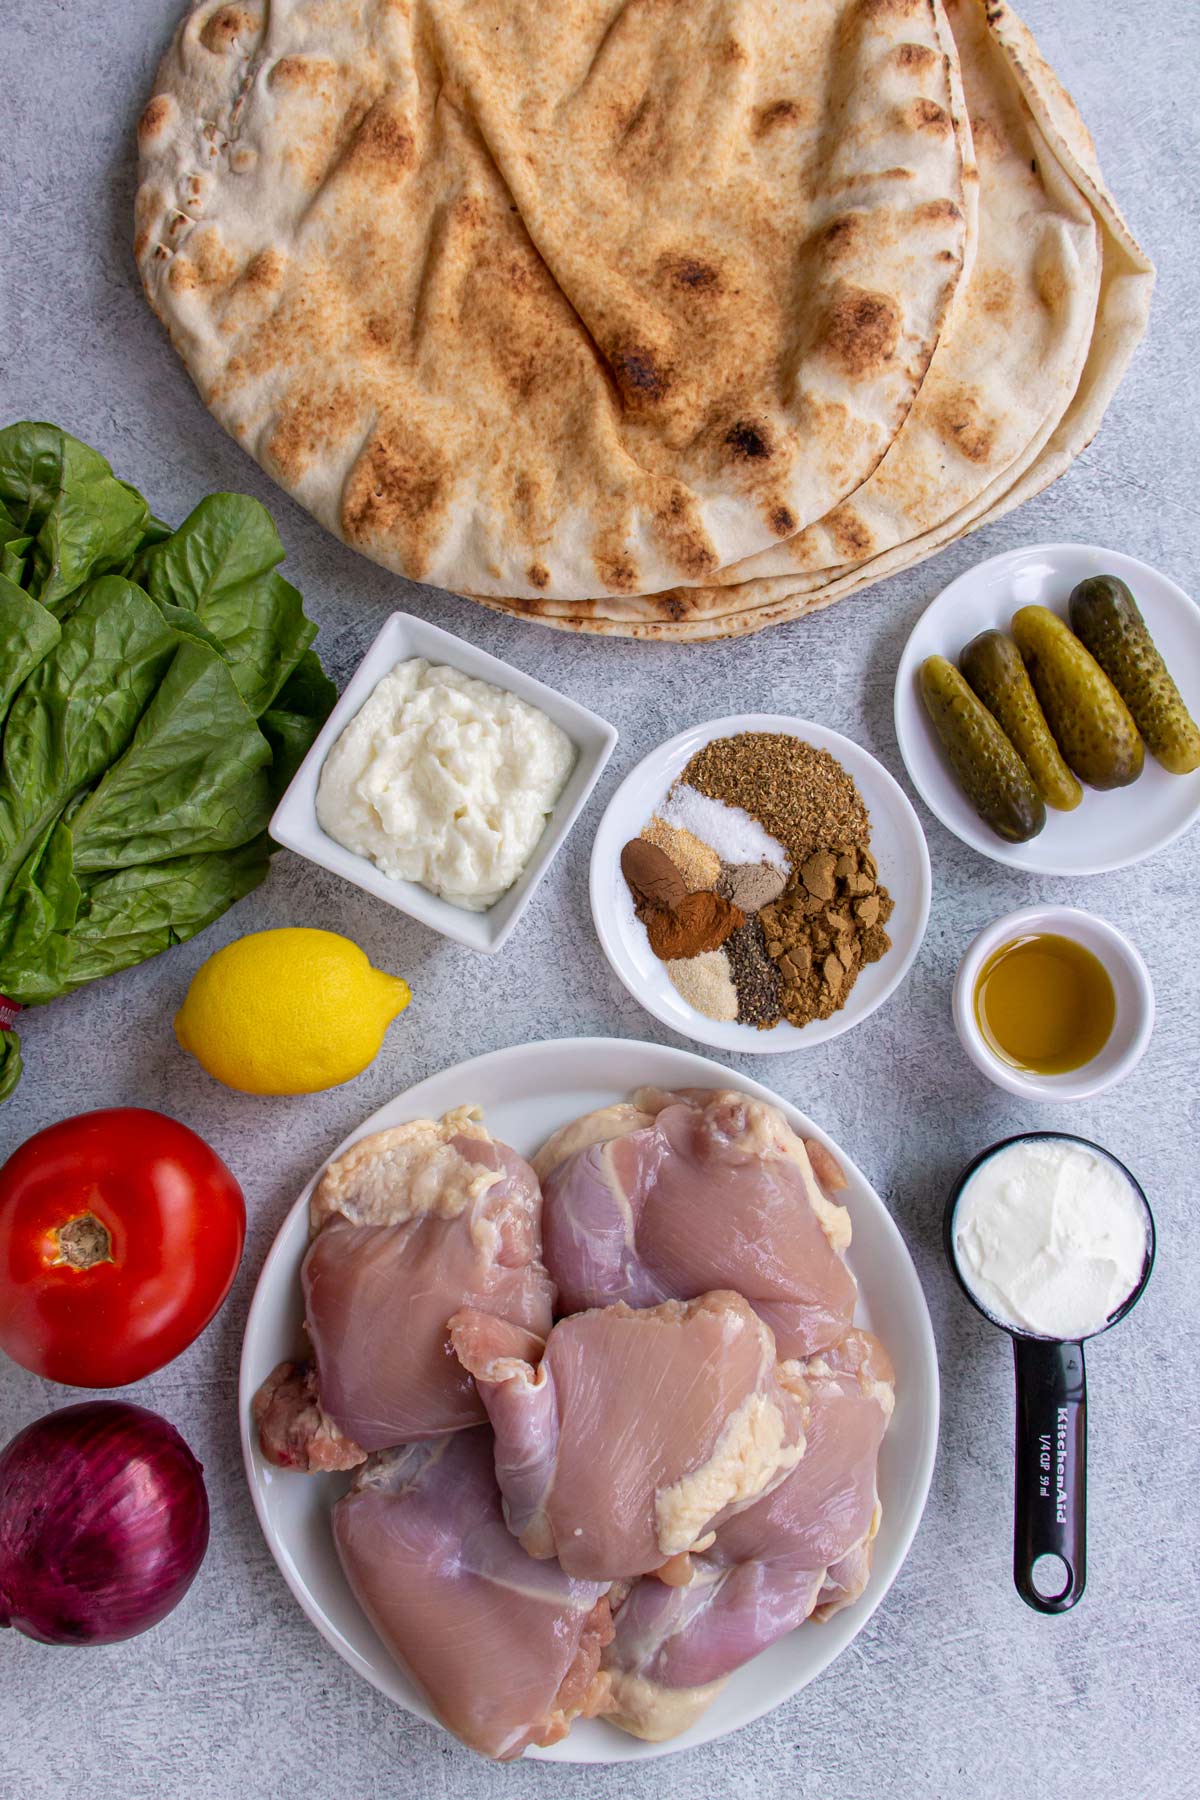 Ingredients for chicken shawarma wraps on a light grey background.